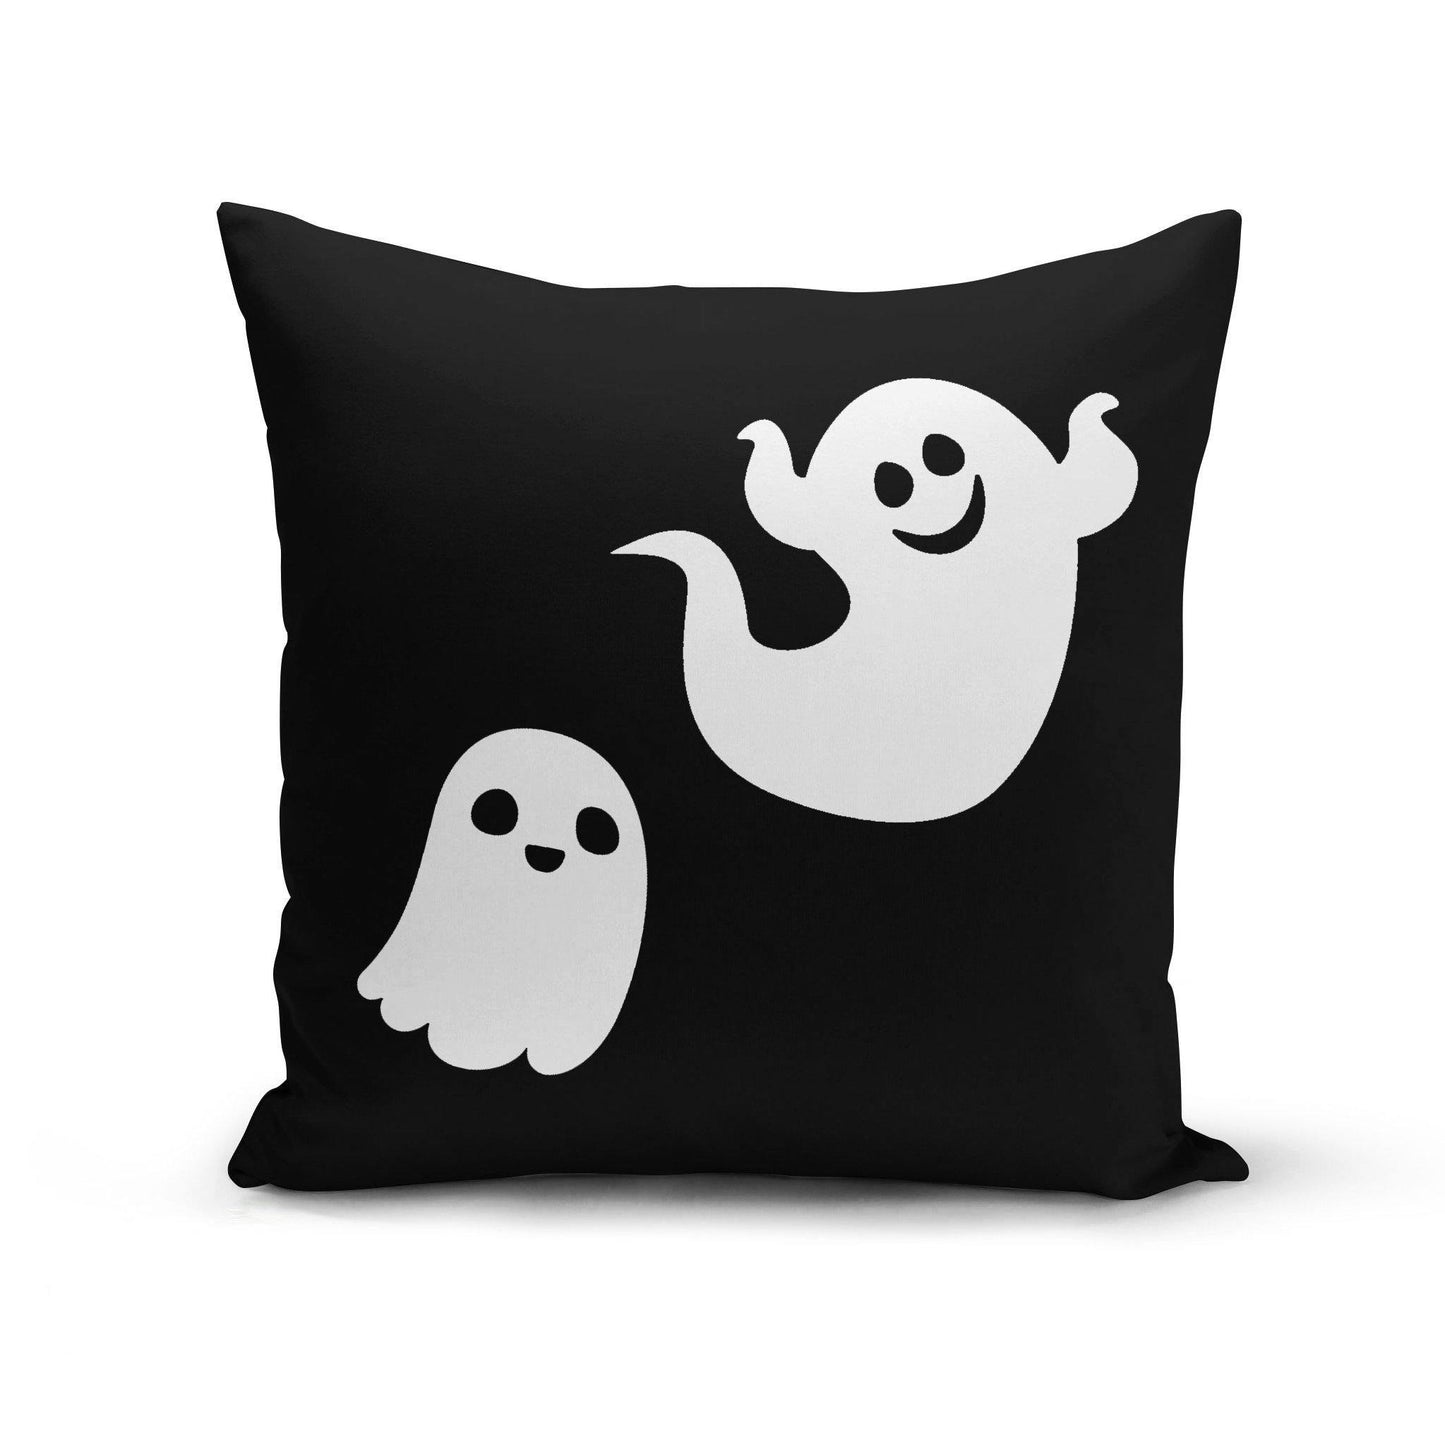 Cute Ghosts Pillow Cover